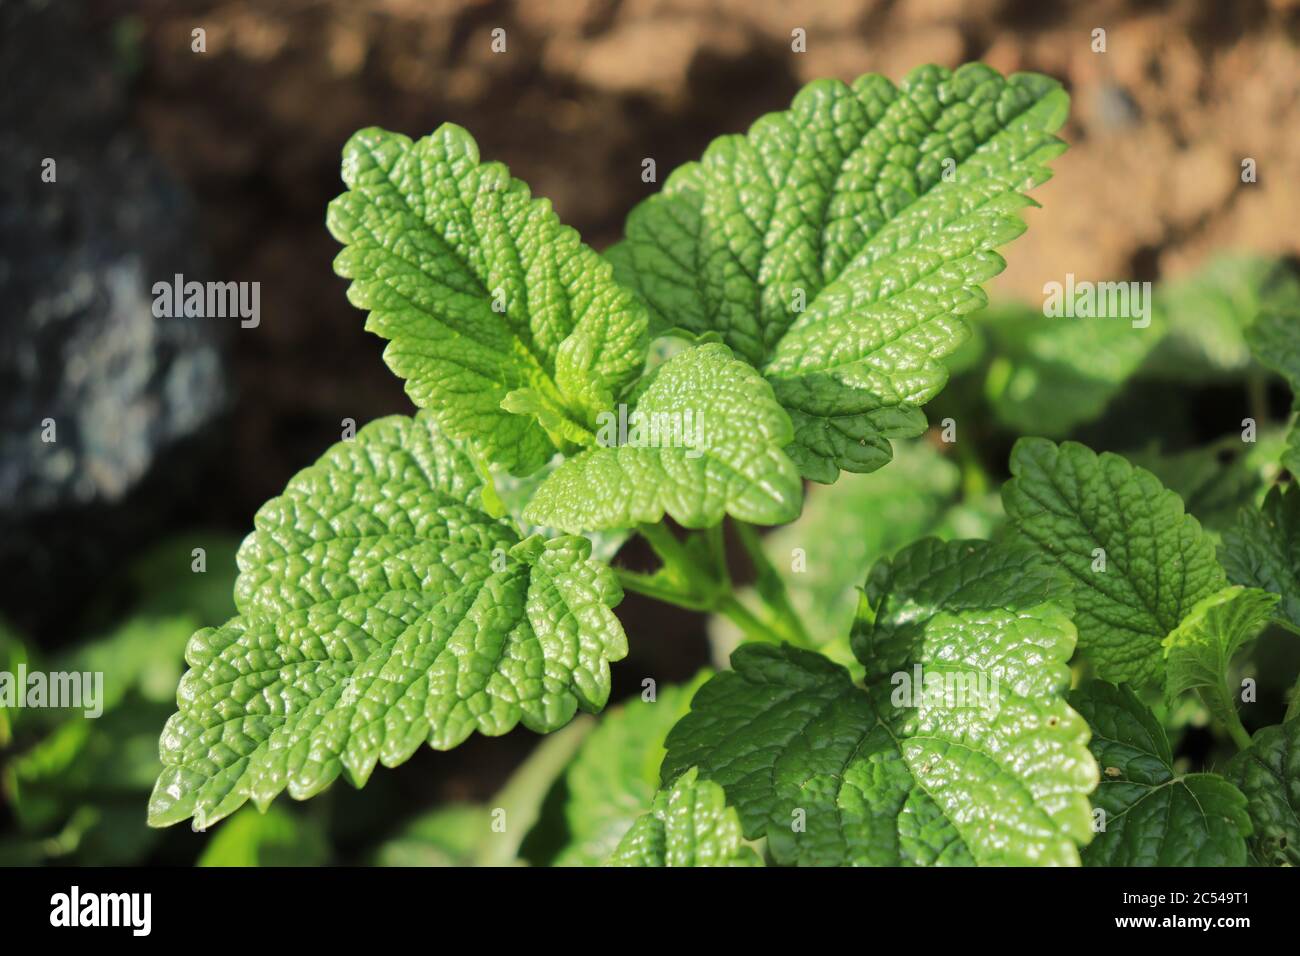 Green healthy leafs of the medicinal plant lemon balm growing in the garden and the blurred background of the rest of the photo Stock Photo